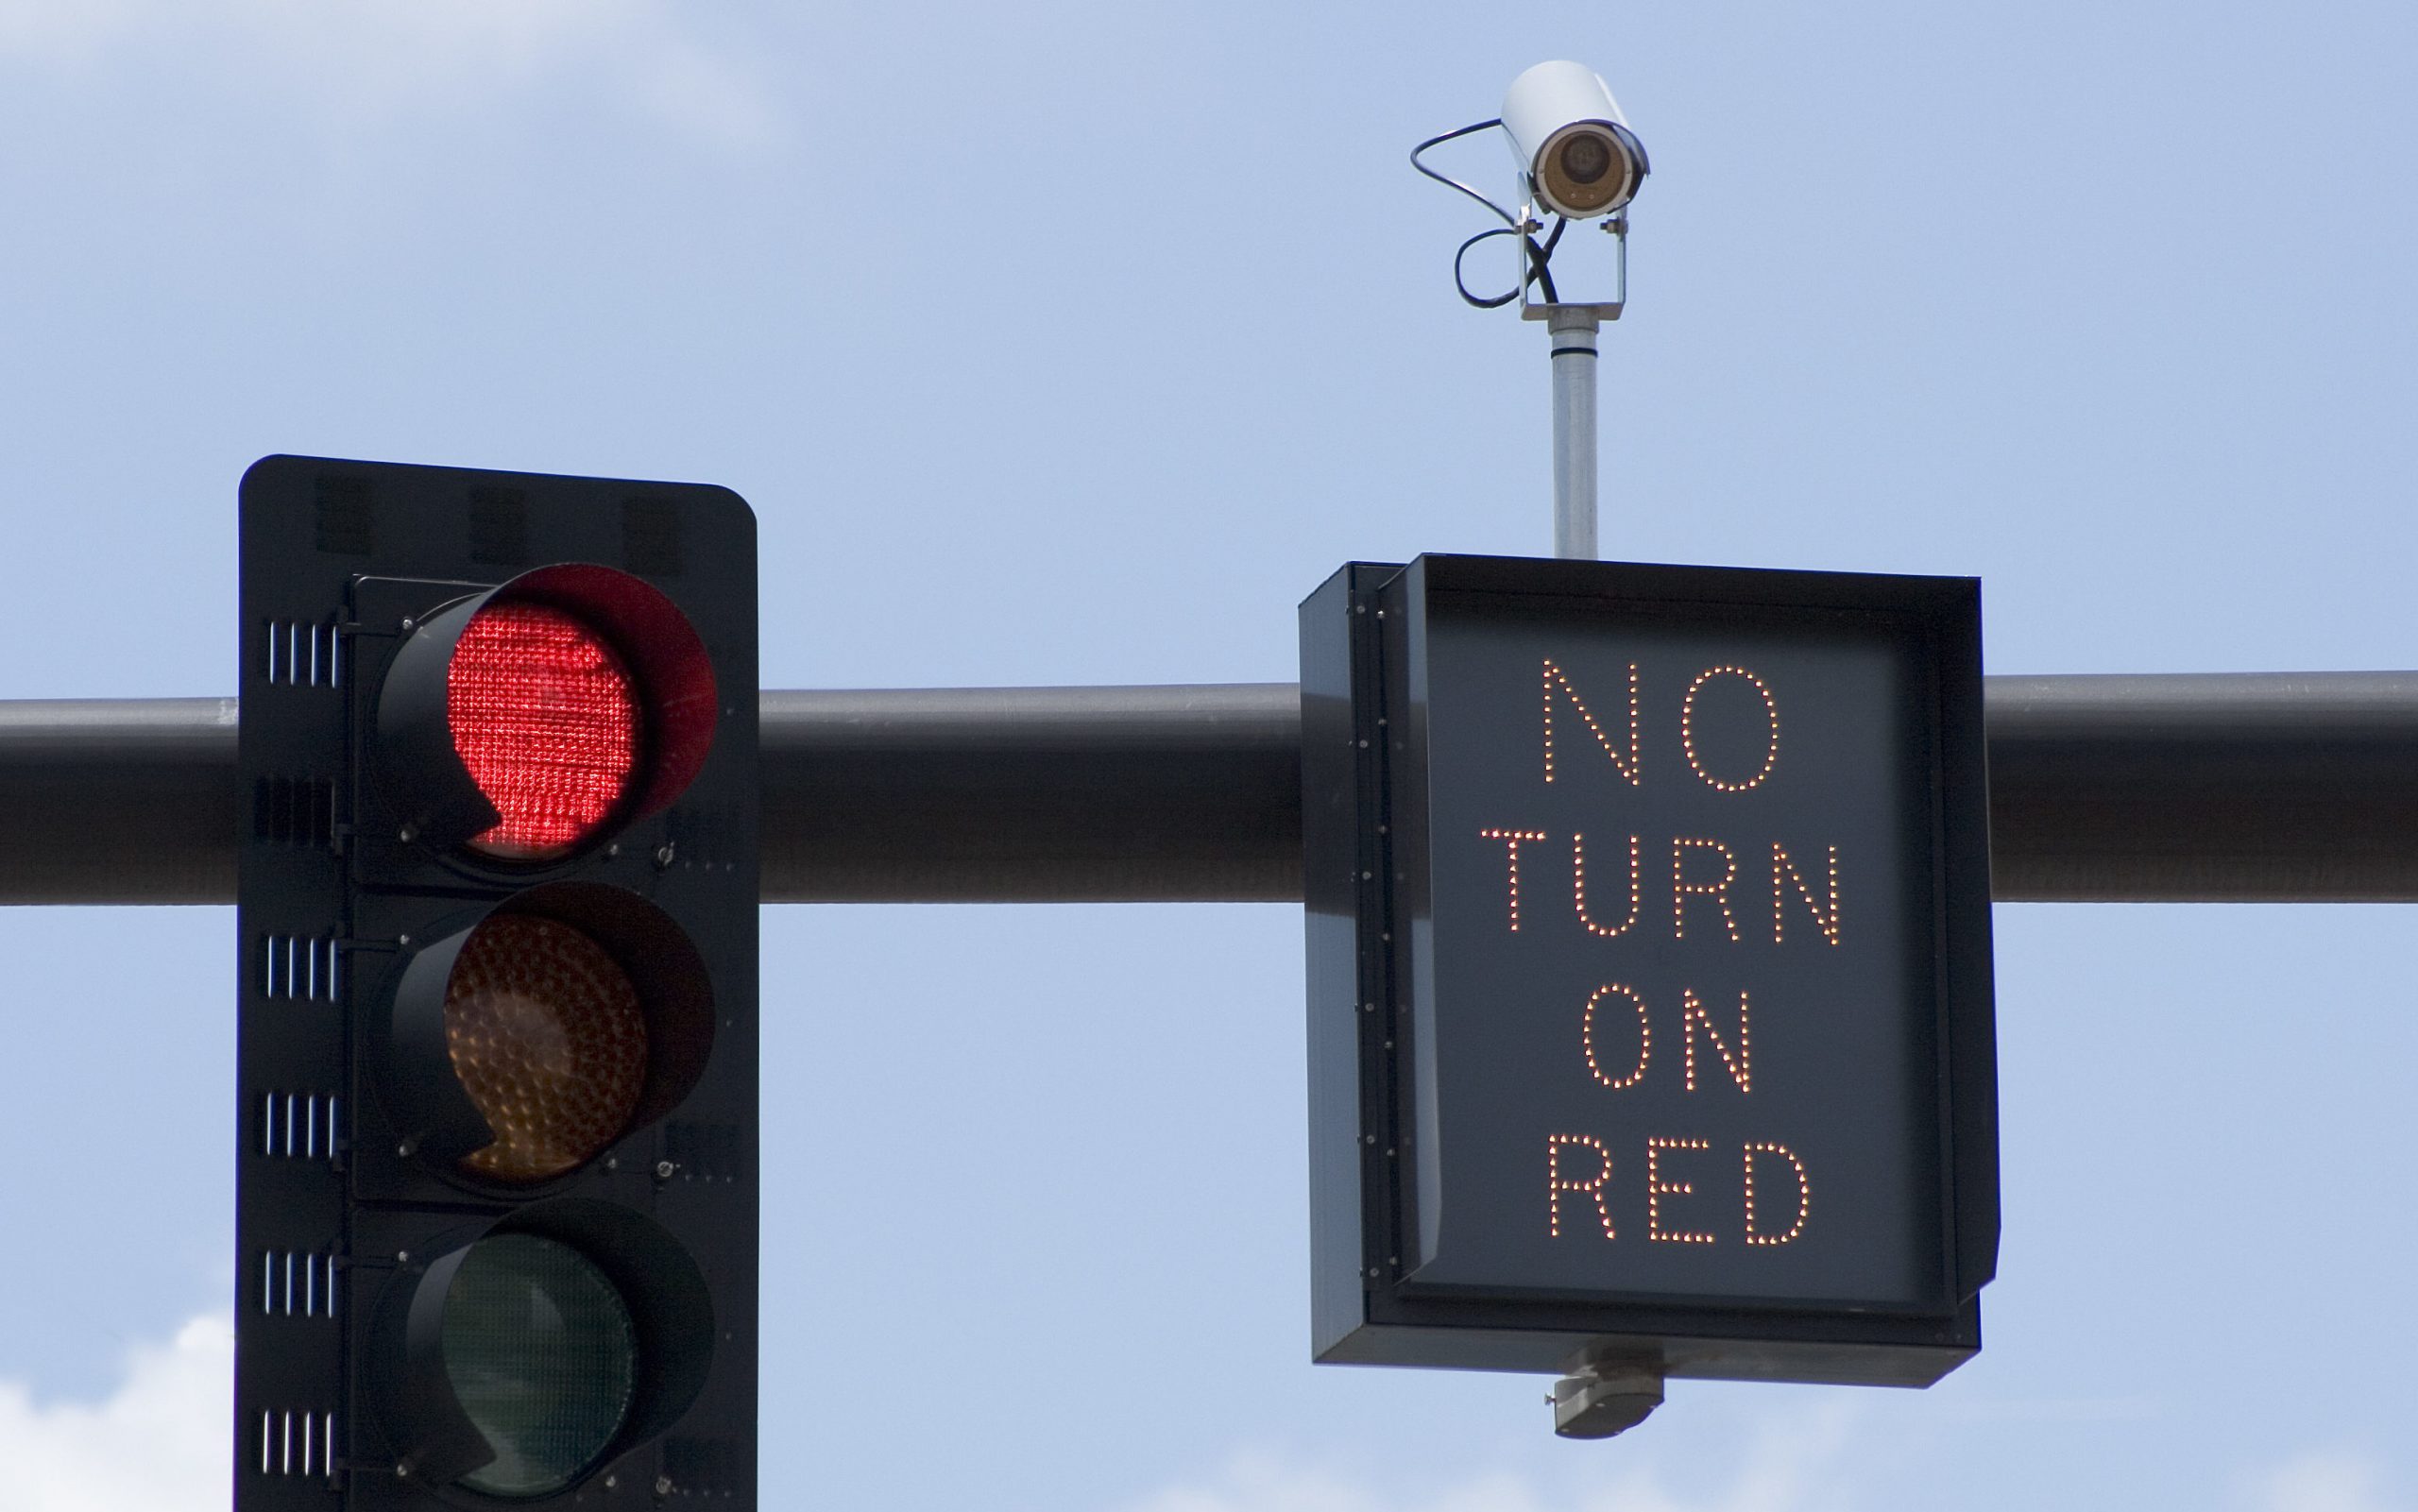 How Do Know Red Light Caught You? | Reader's Digest